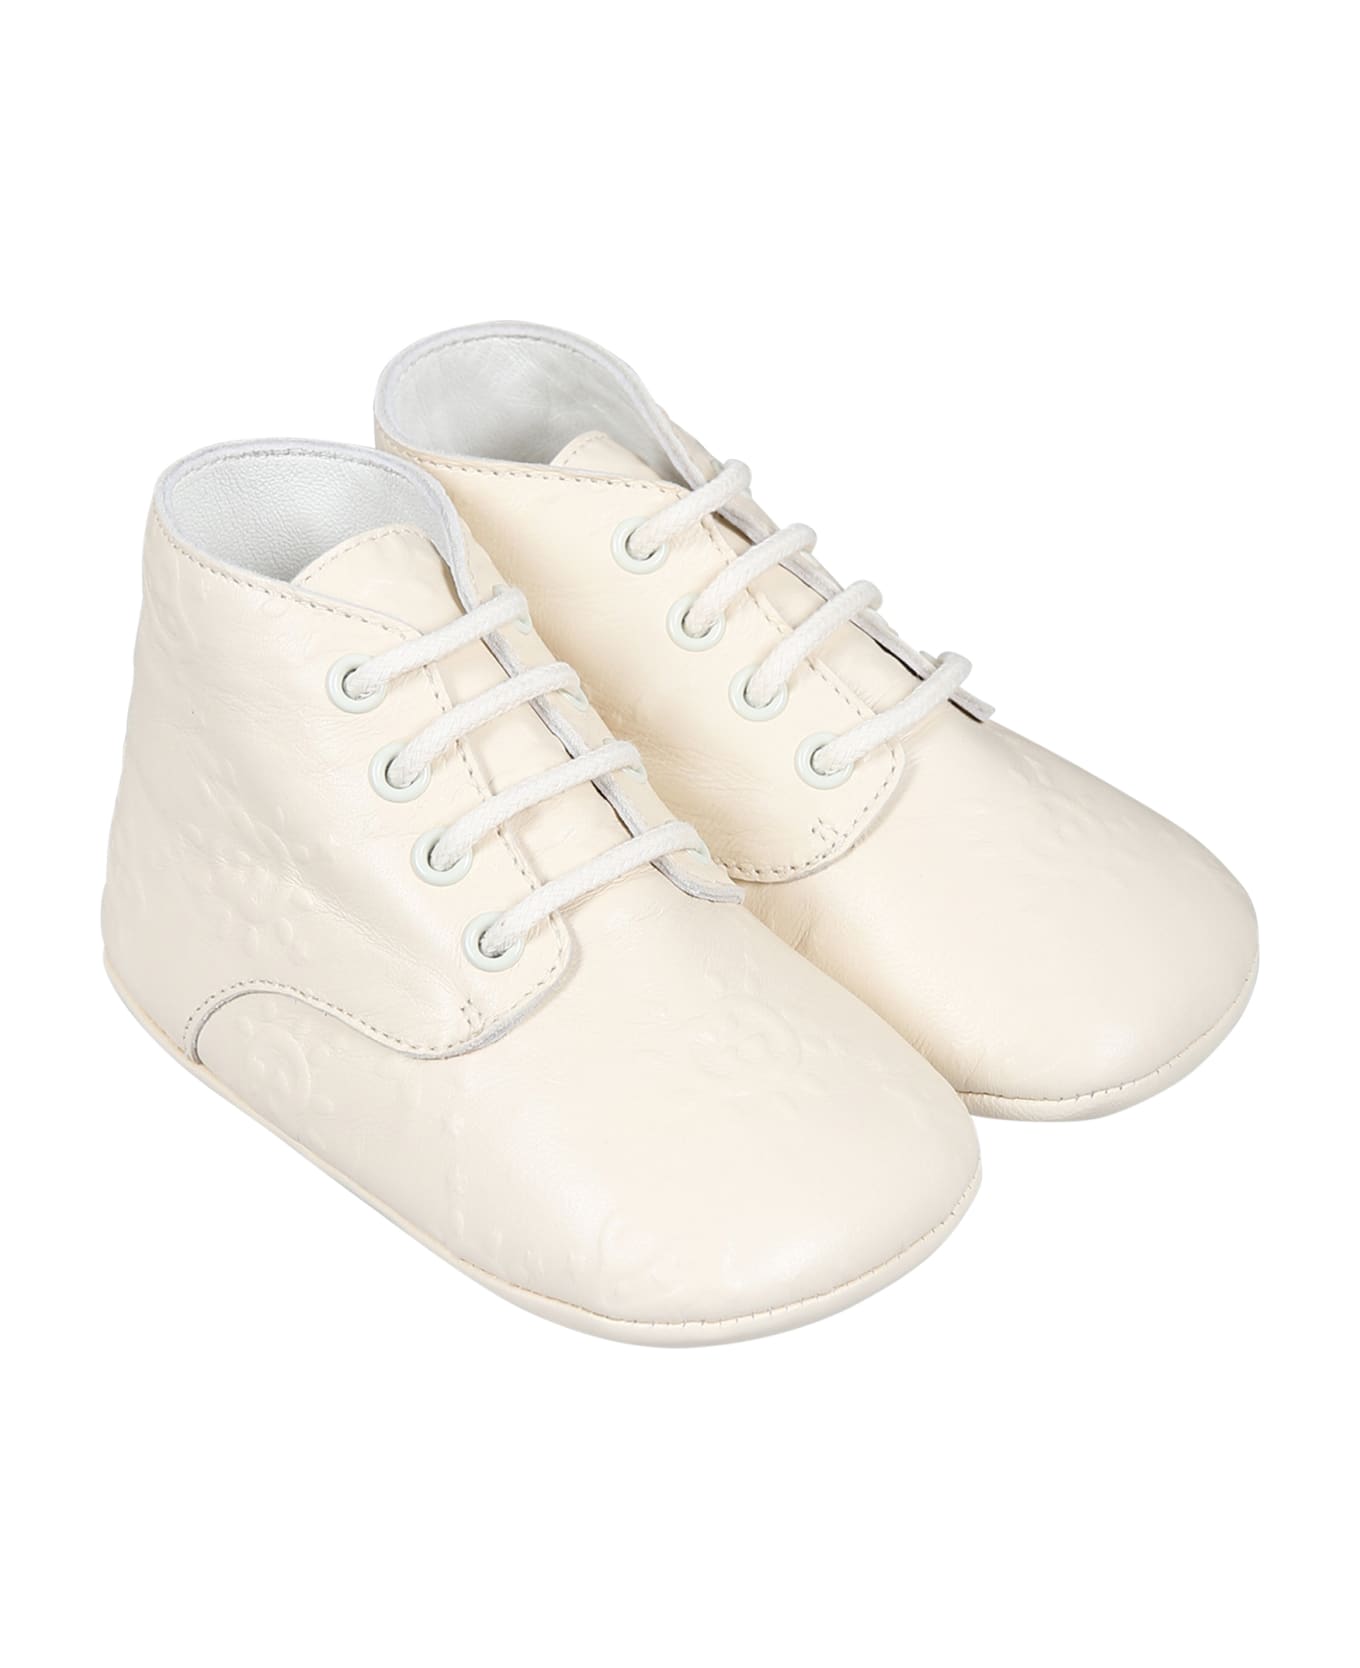 Gucci Ivory Shoes caminhada For Baby Kids With Gg Cross And Ufo - Ivory